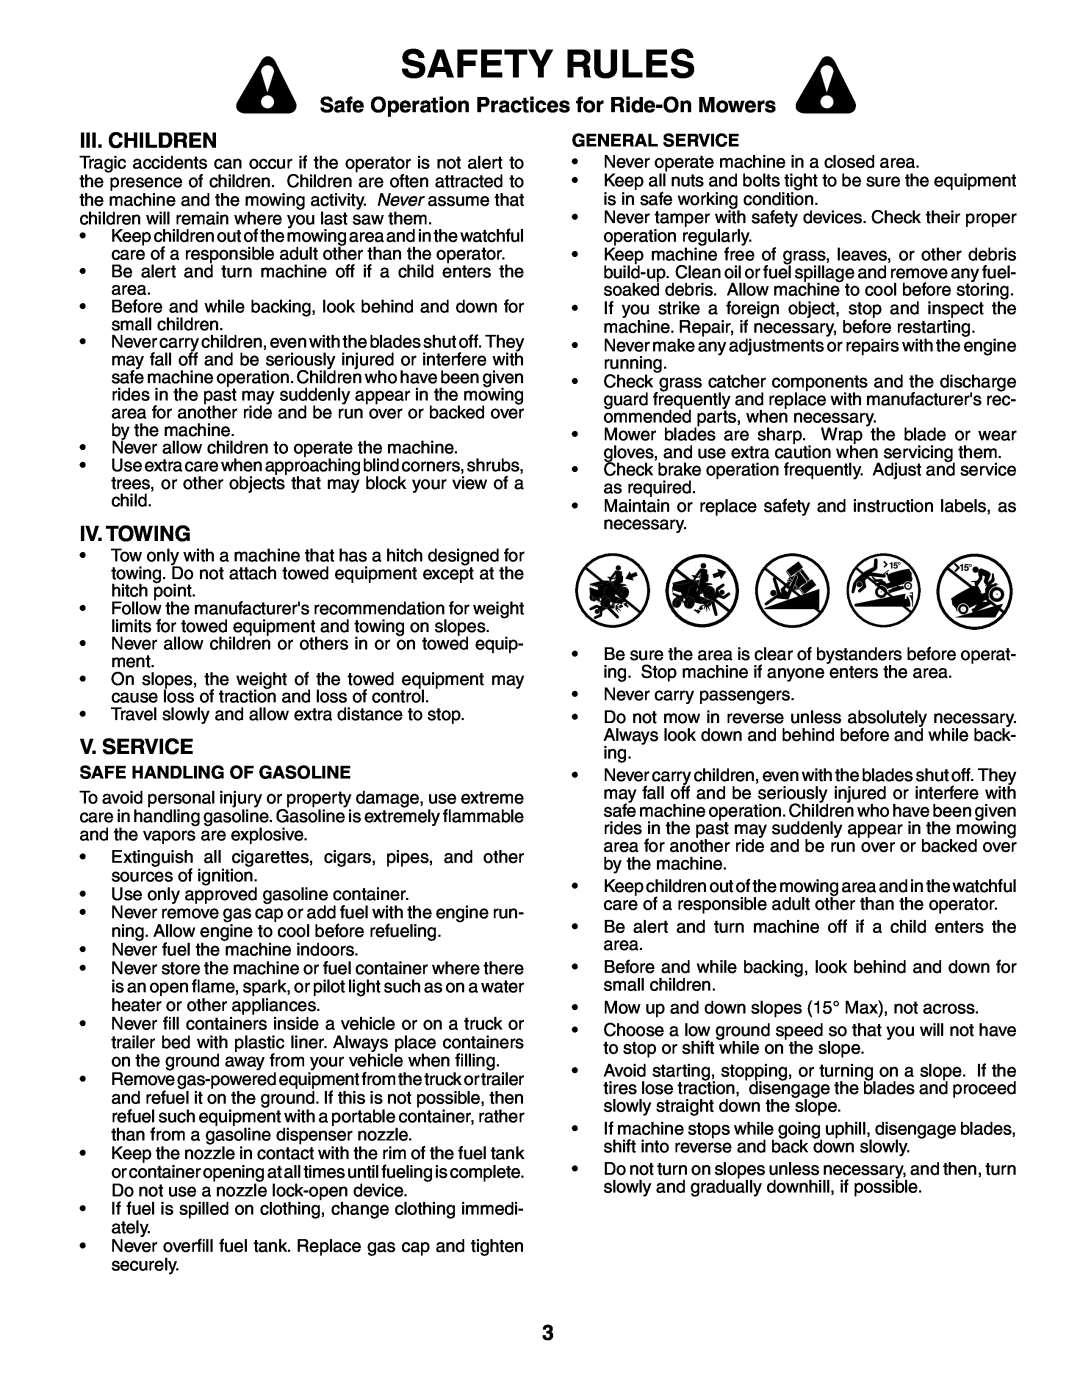 Murray MB12538LT manual Iii. Children, Iv. Towing, V. Service, Safety Rules, Safe Operation Practices for Ride-OnMowers 